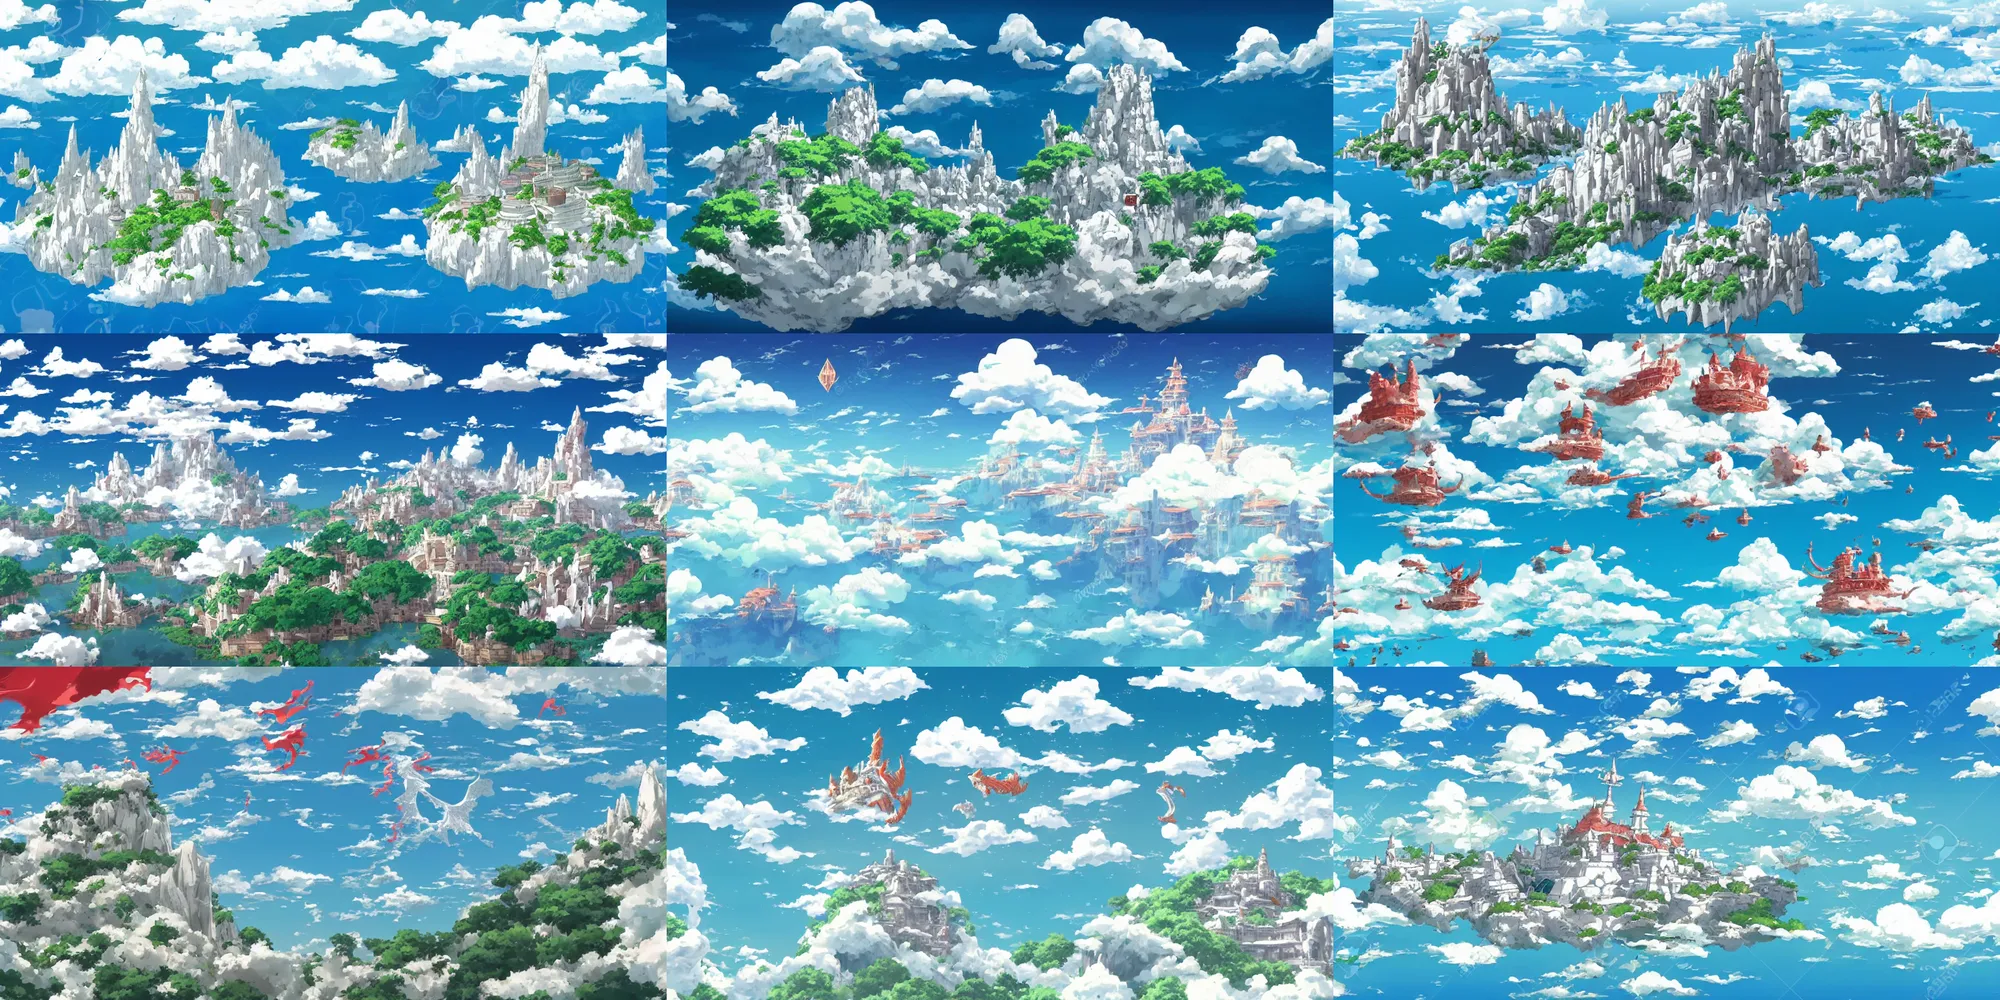 city in the sky ， miyazaki style, Stable Diffusion